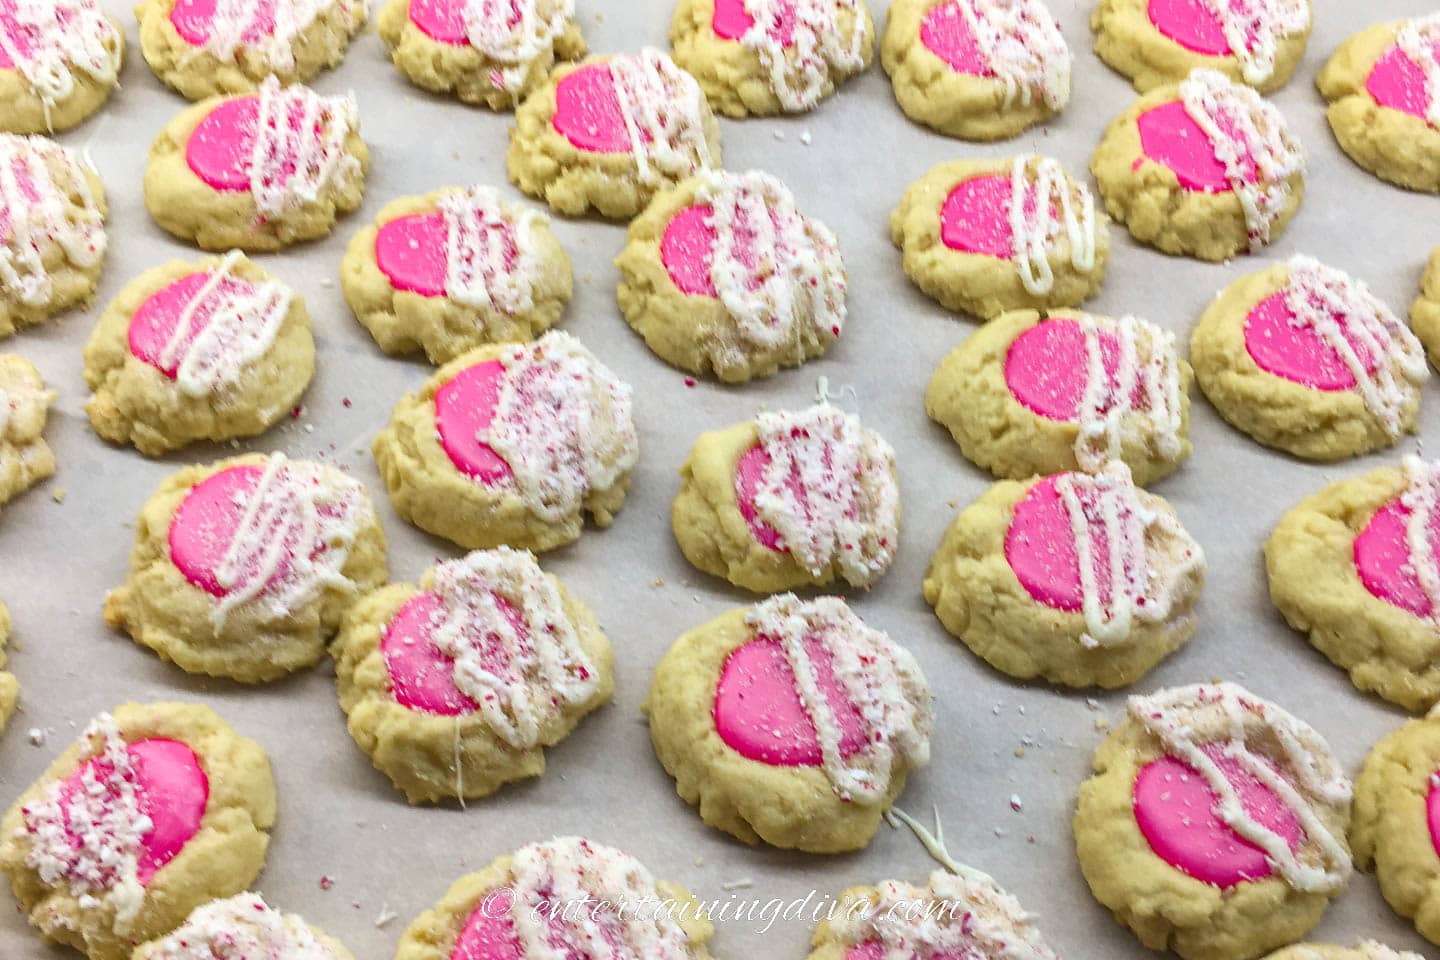 thumbprint cookies garnished with white chocolate and crushed candy canes